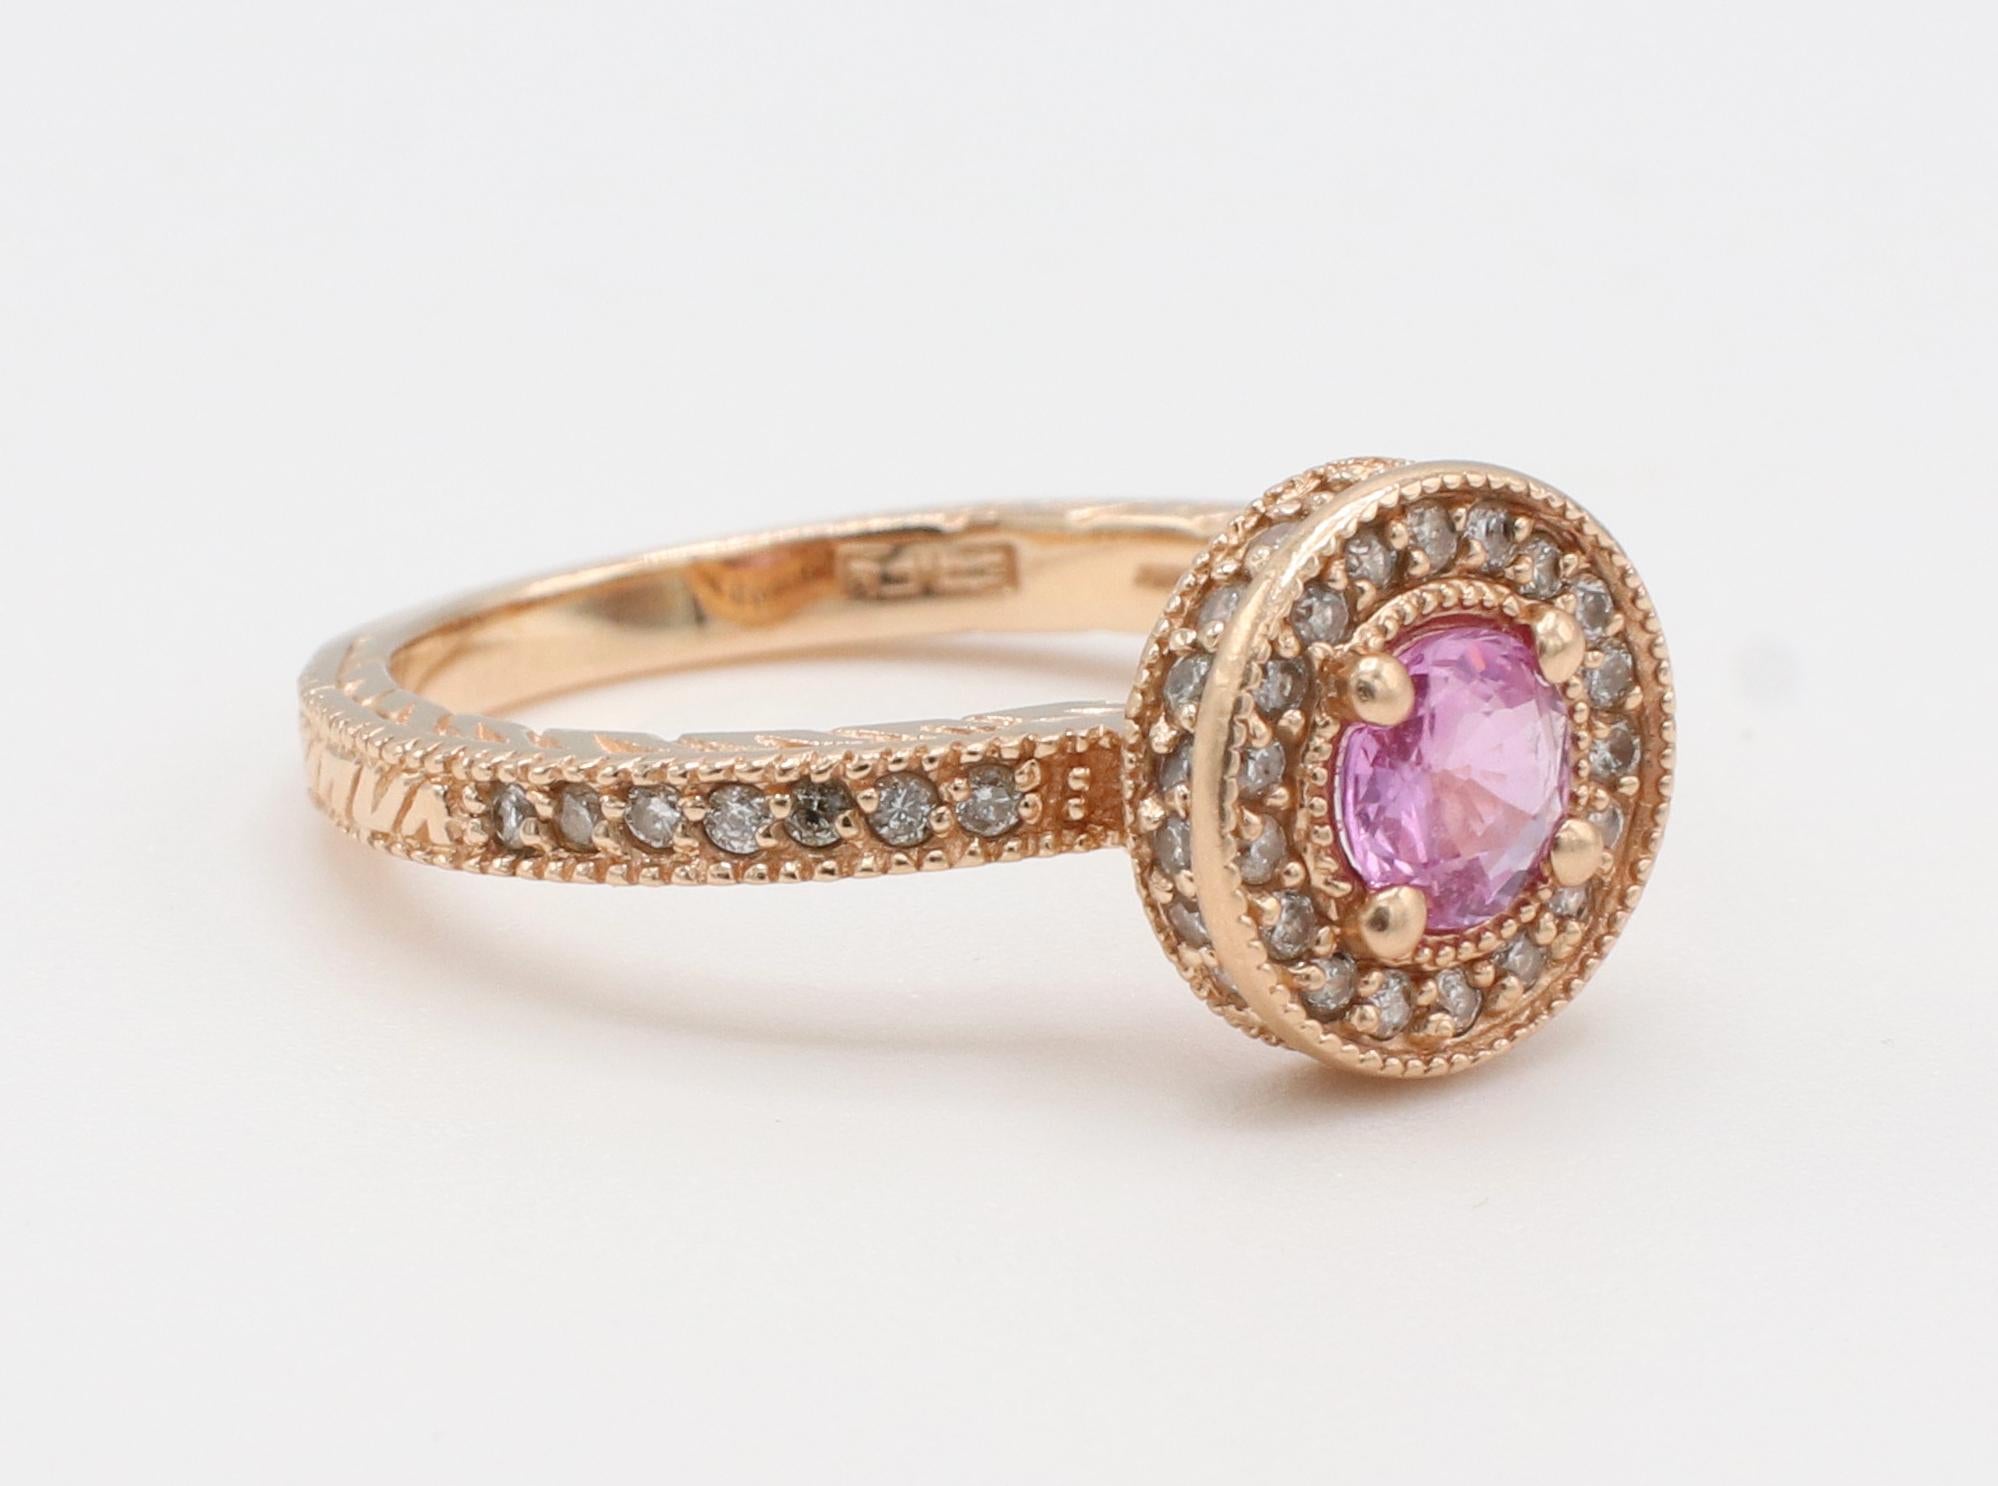 Effy Rose Gold Pink Sapphire & Natural Diamond Halo Ring 
Metal: 14k rose gold
Weight: 4.18 grams
Sapphire: Pink round brilliant sapphire, approx. 0.50 carats
Diamonds: Approx. .25 CTW J-K SI round natural diamonds
Size: 7 (US)
Diameter: 10mm
